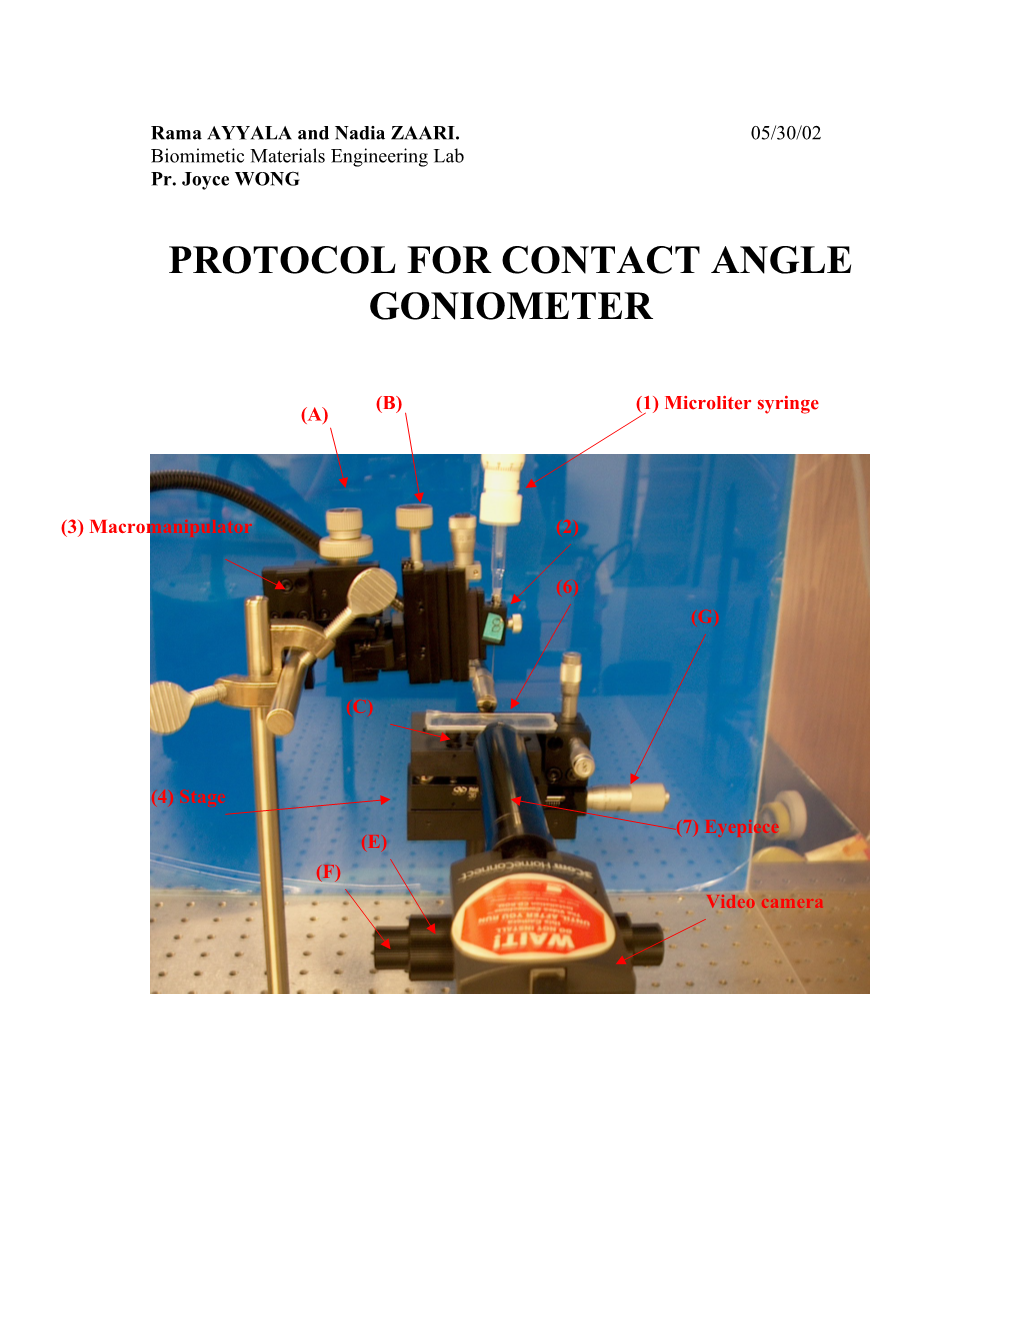 Protocol for Contact Angle Goniometer